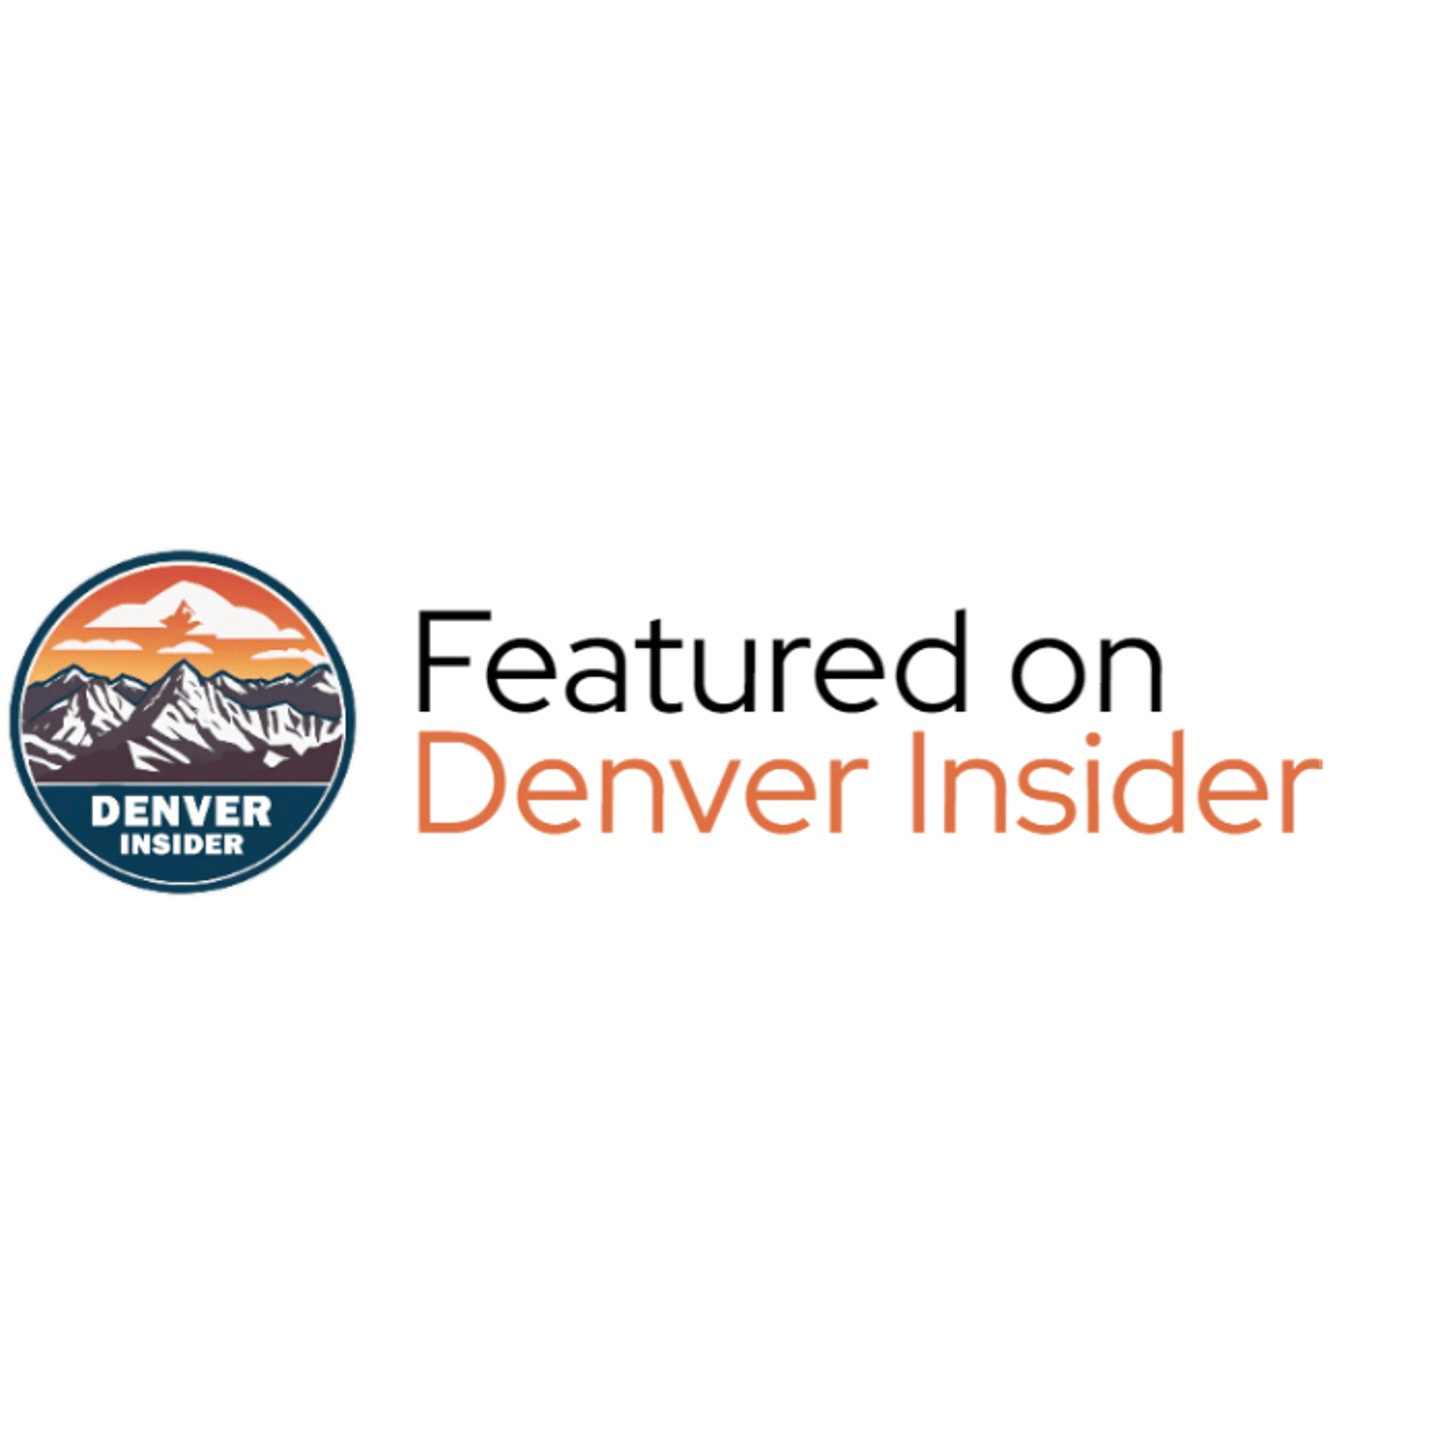 Featured as one of the Top Restaurants in Denver!